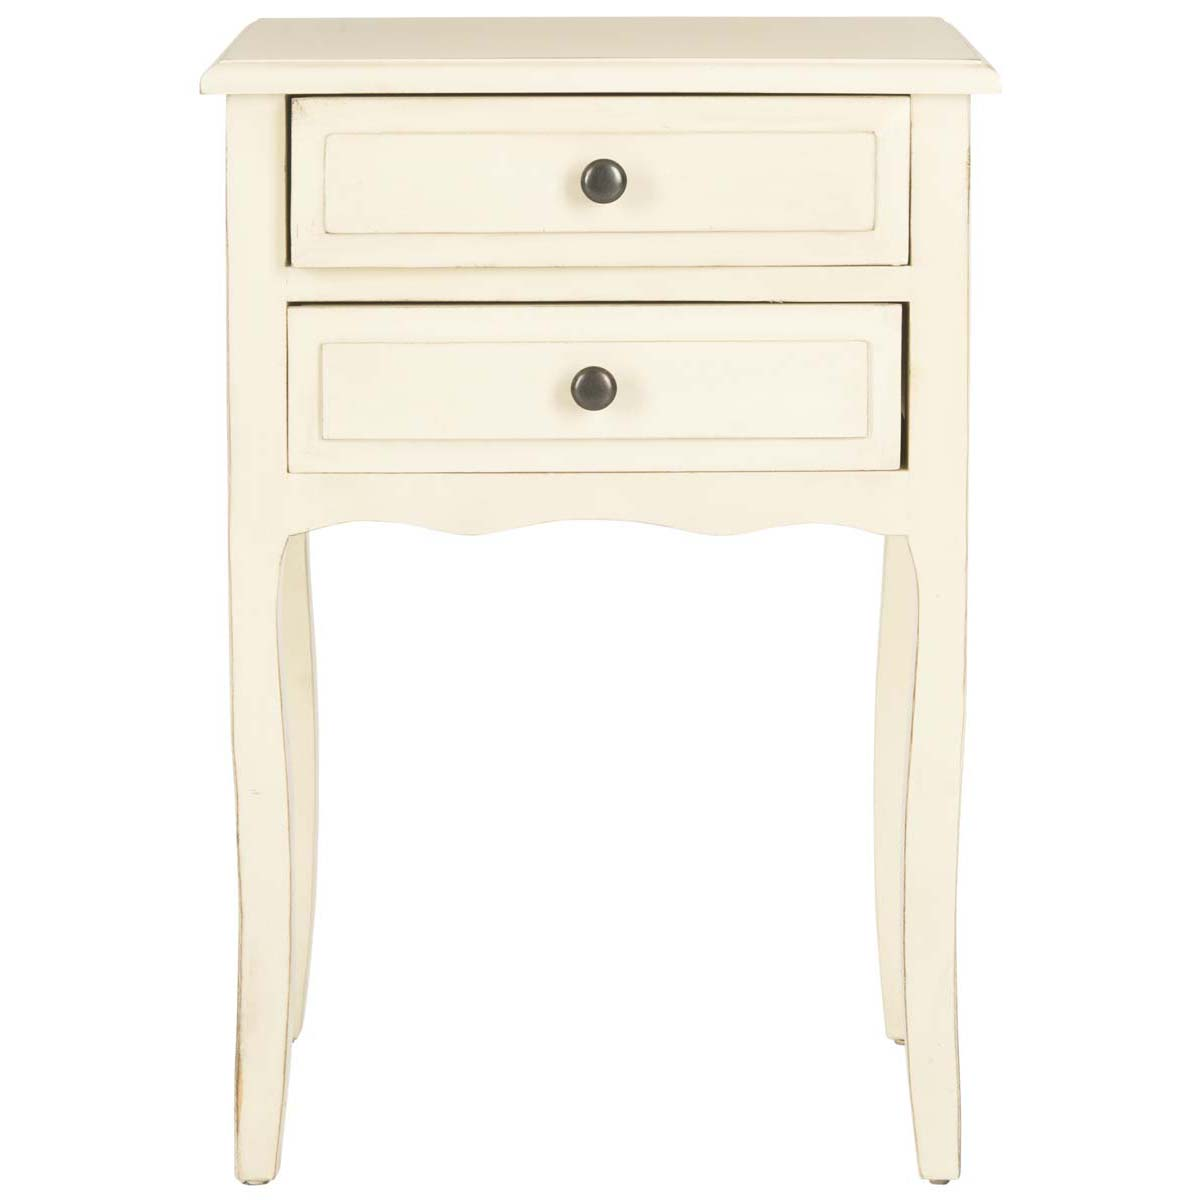 Safavieh Lori End Table With Storage Drawers , AMH6576